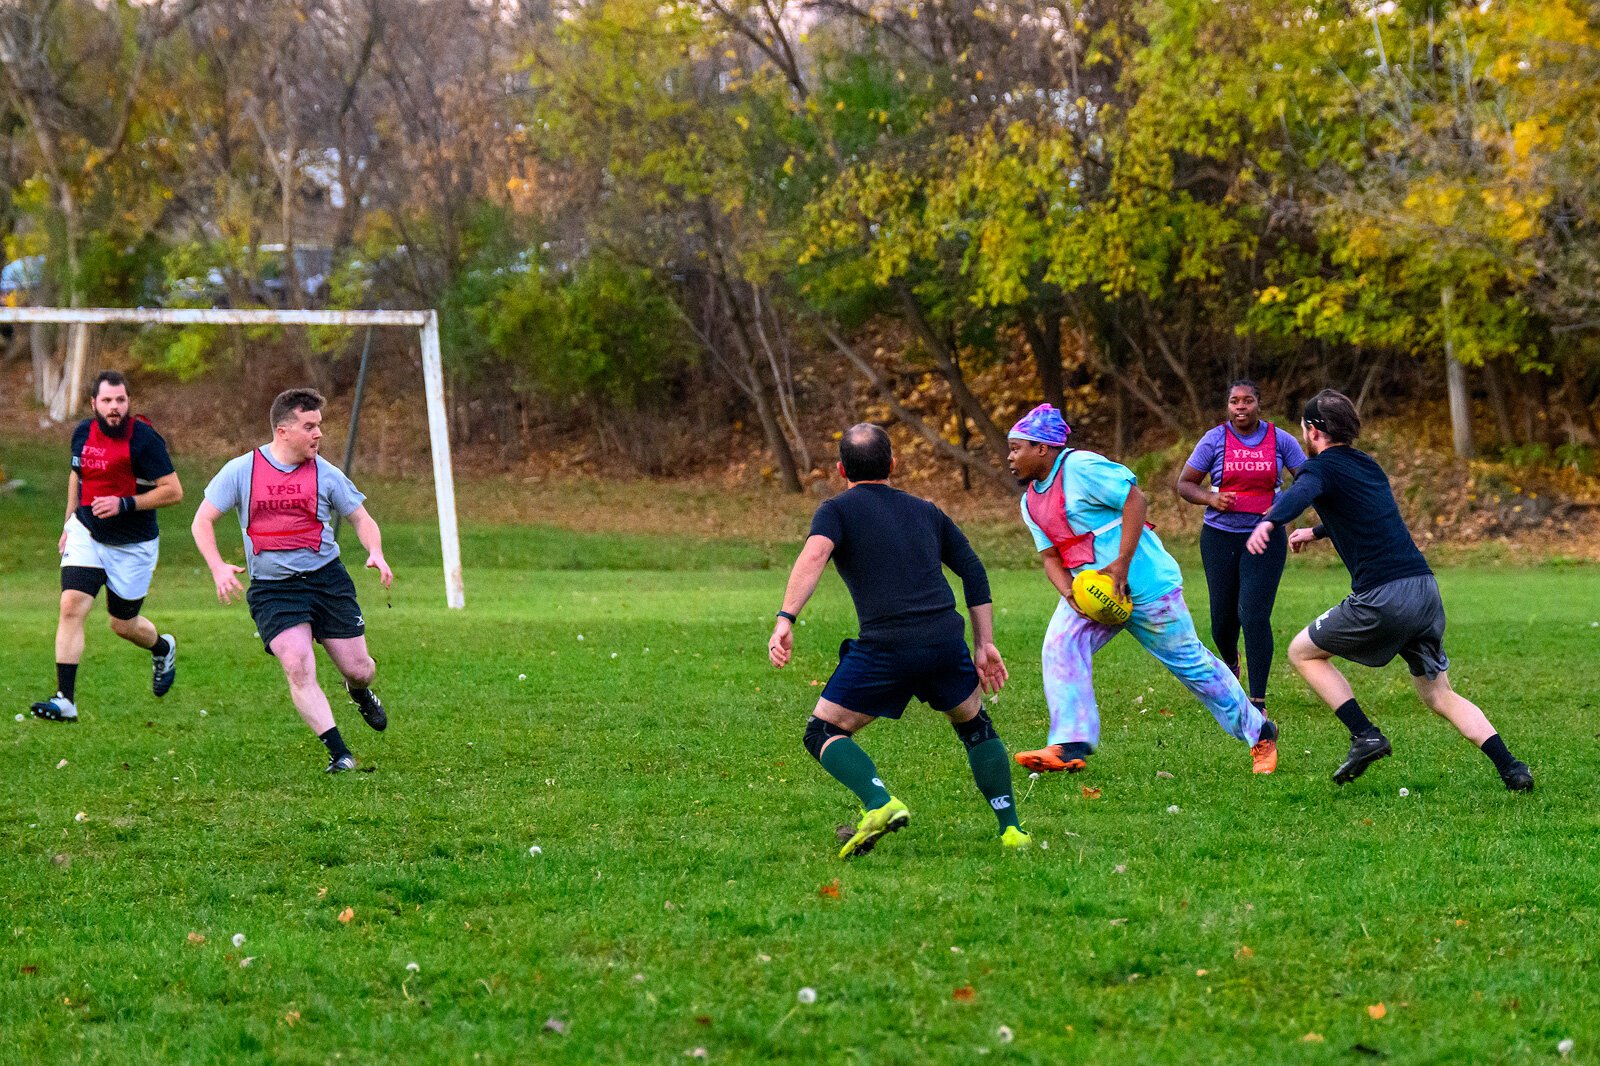 An Ypsilanti Rugby Club Men's and Women's teams practice.